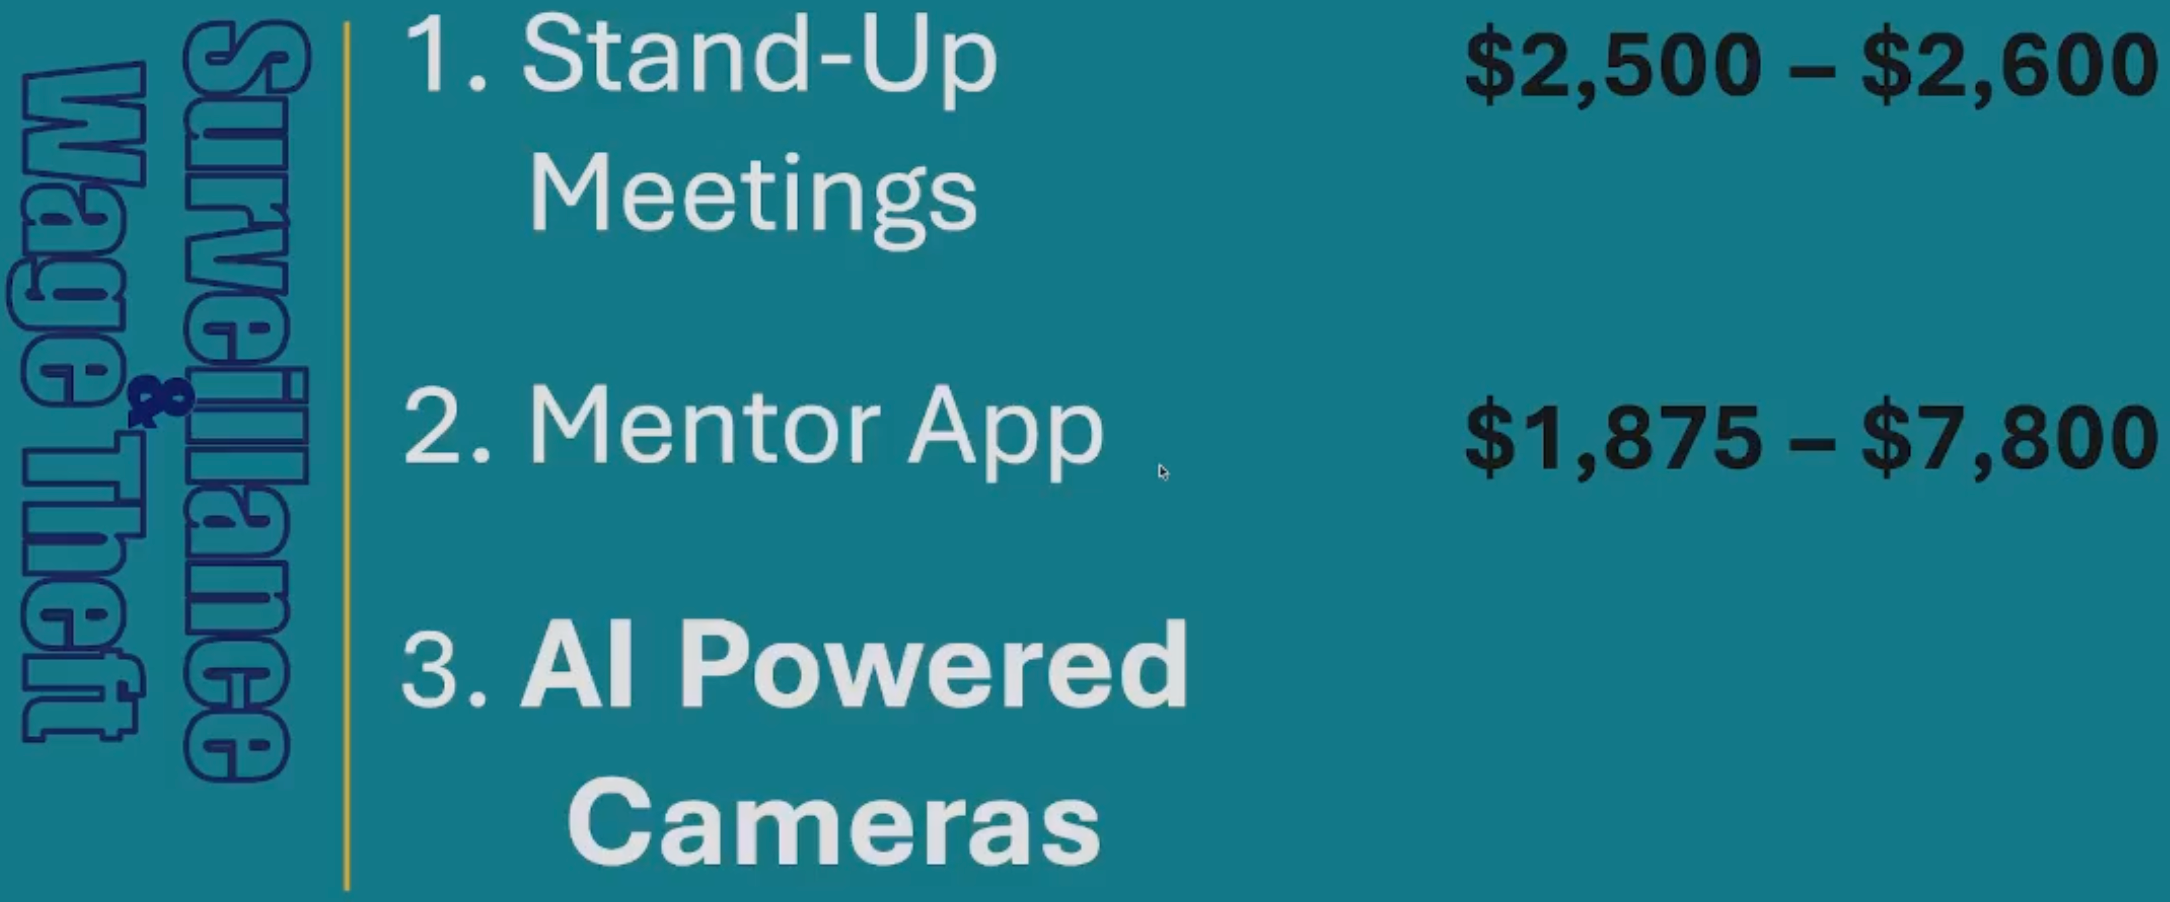 Screenshot of a slide with a green background. Surveillance Wage Theft written on the side, and with text 1) Stand-Up Meetings $2,500-$2,600 2. Mentor App $1,875-$7,800, 3. AI Powered Cameras